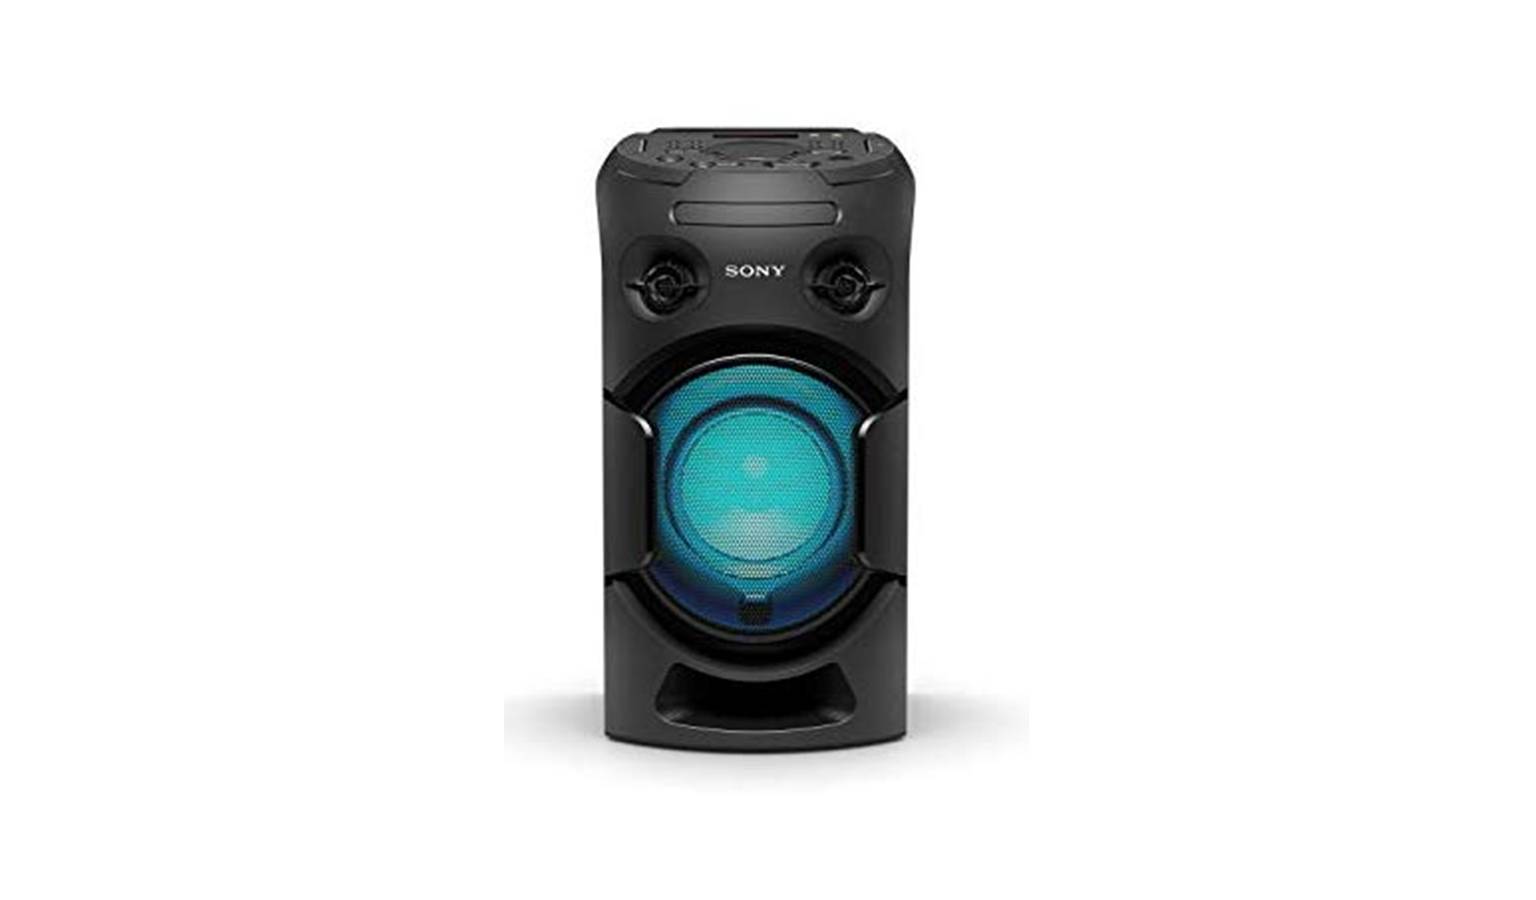 sony v21d high power audio system with bluetooth